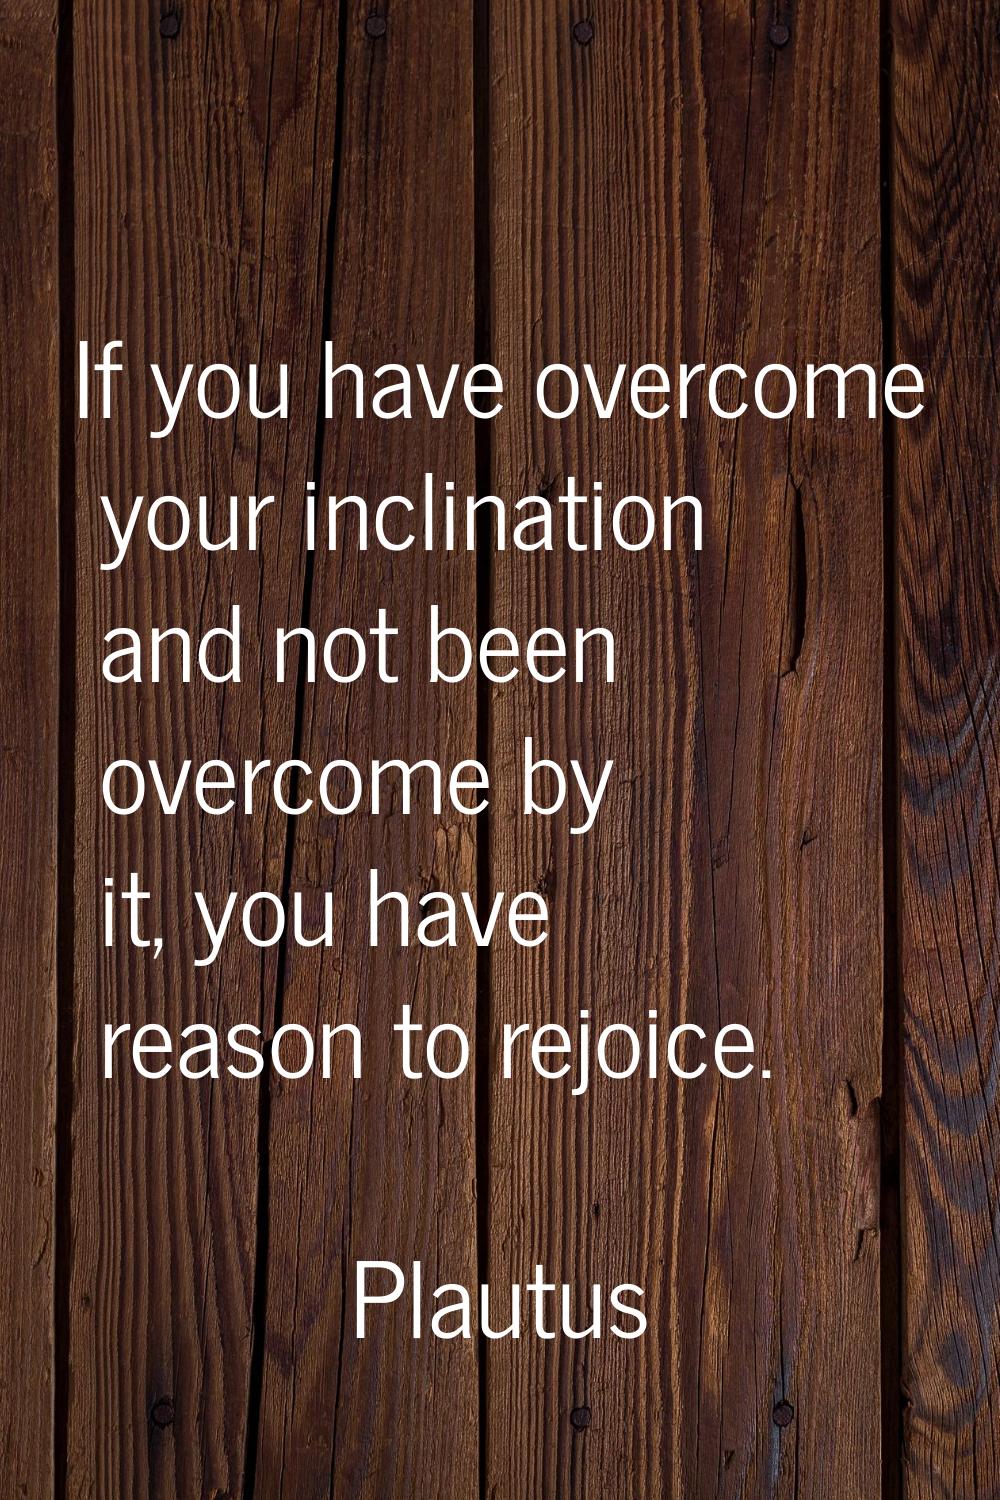 If you have overcome your inclination and not been overcome by it, you have reason to rejoice.